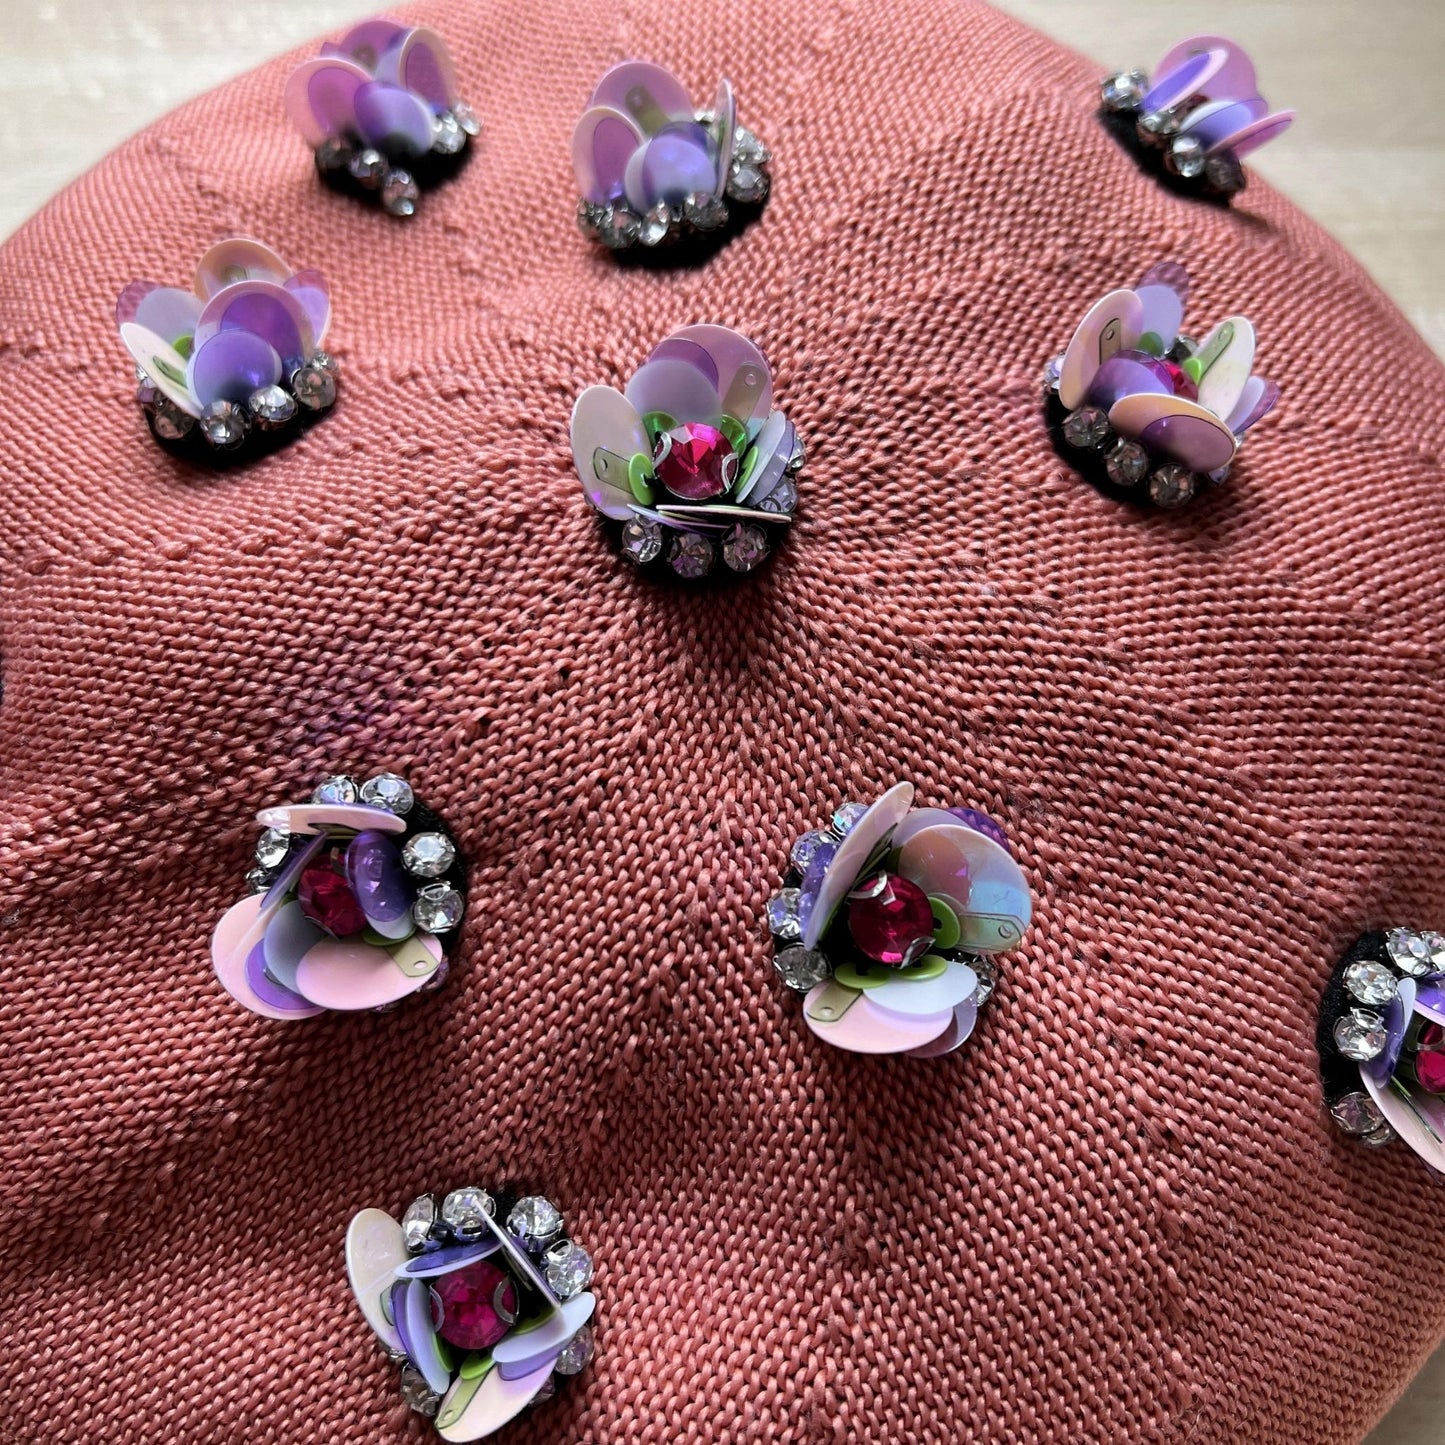 Beret Hat Pink with Flowers Women